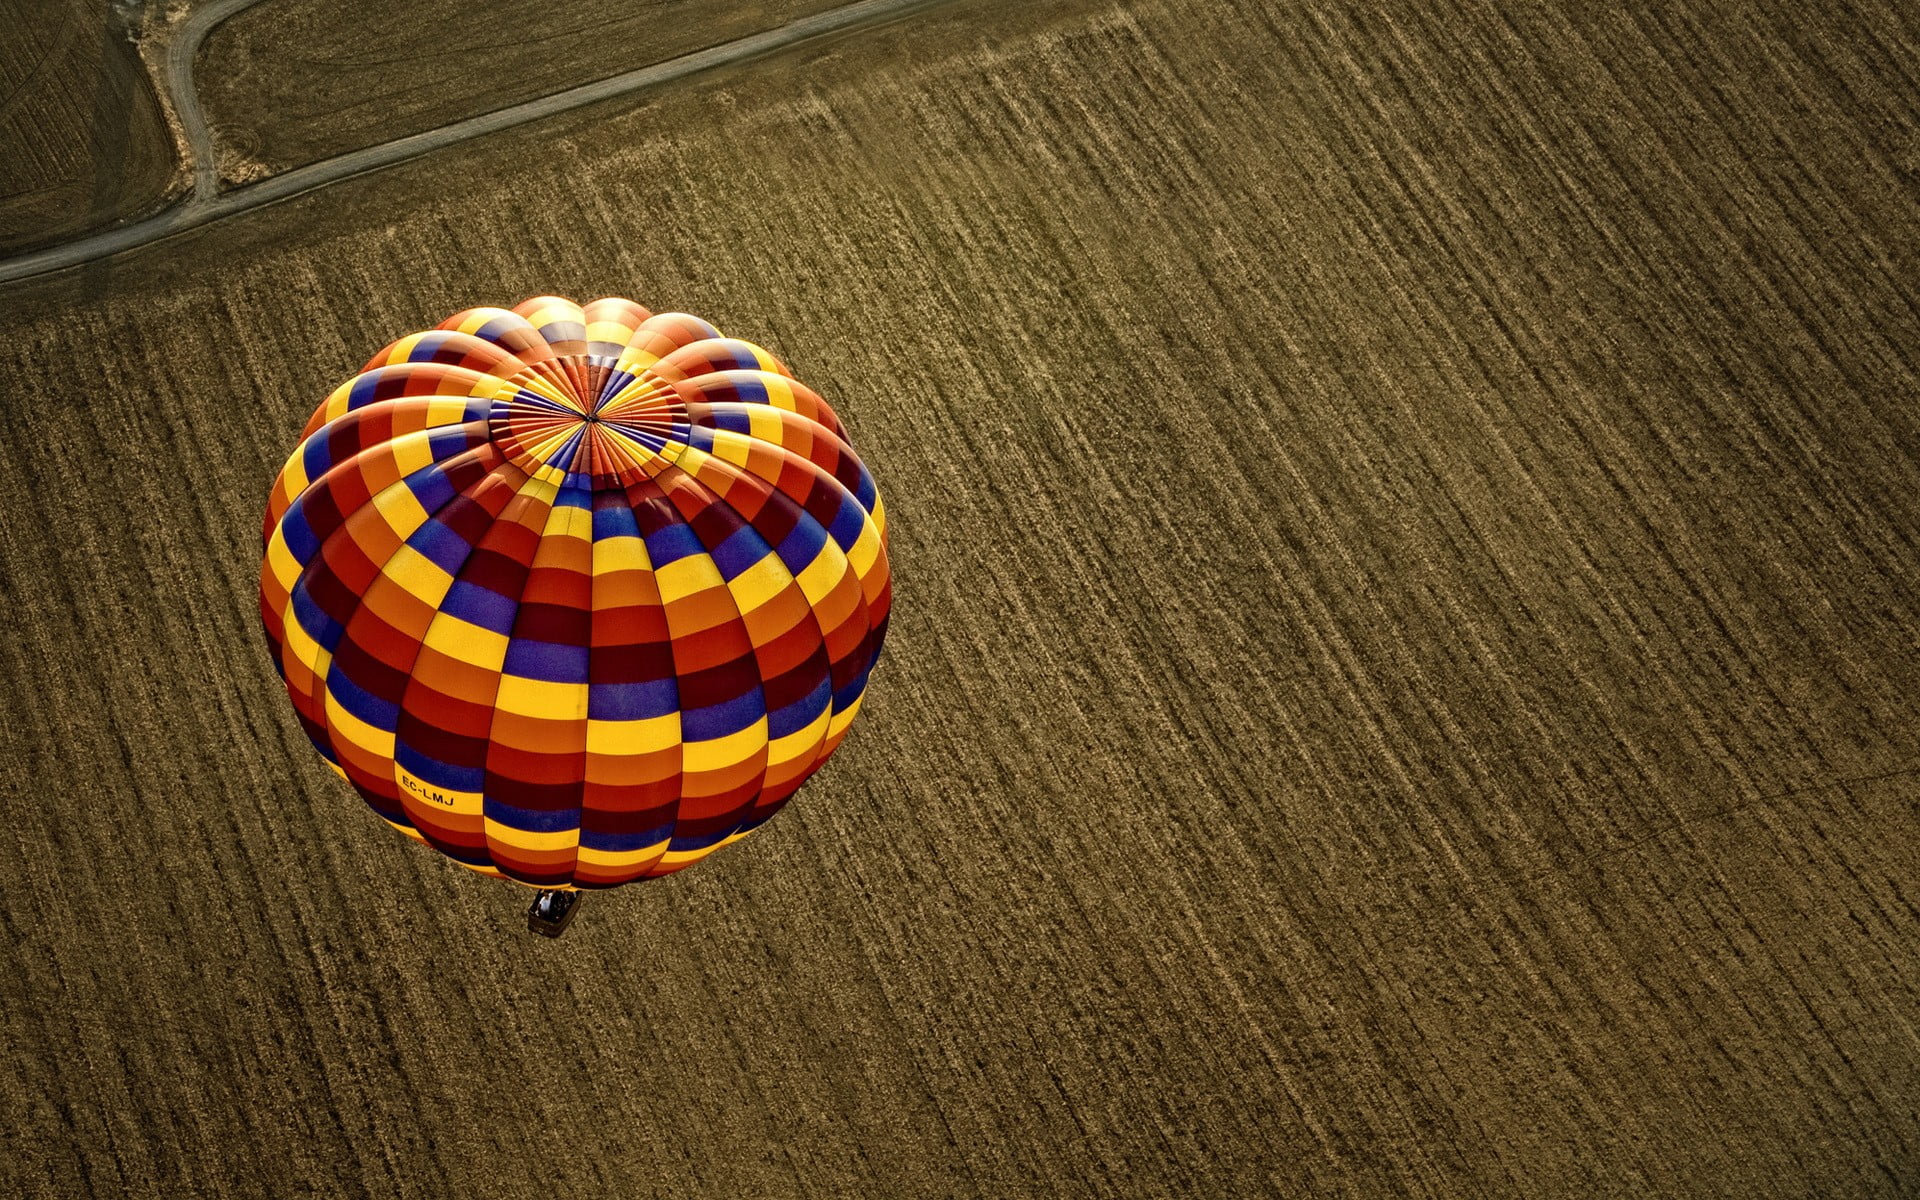 blue, yellow, and orange hot air balloon, nature, landscape, hot air balloons, field